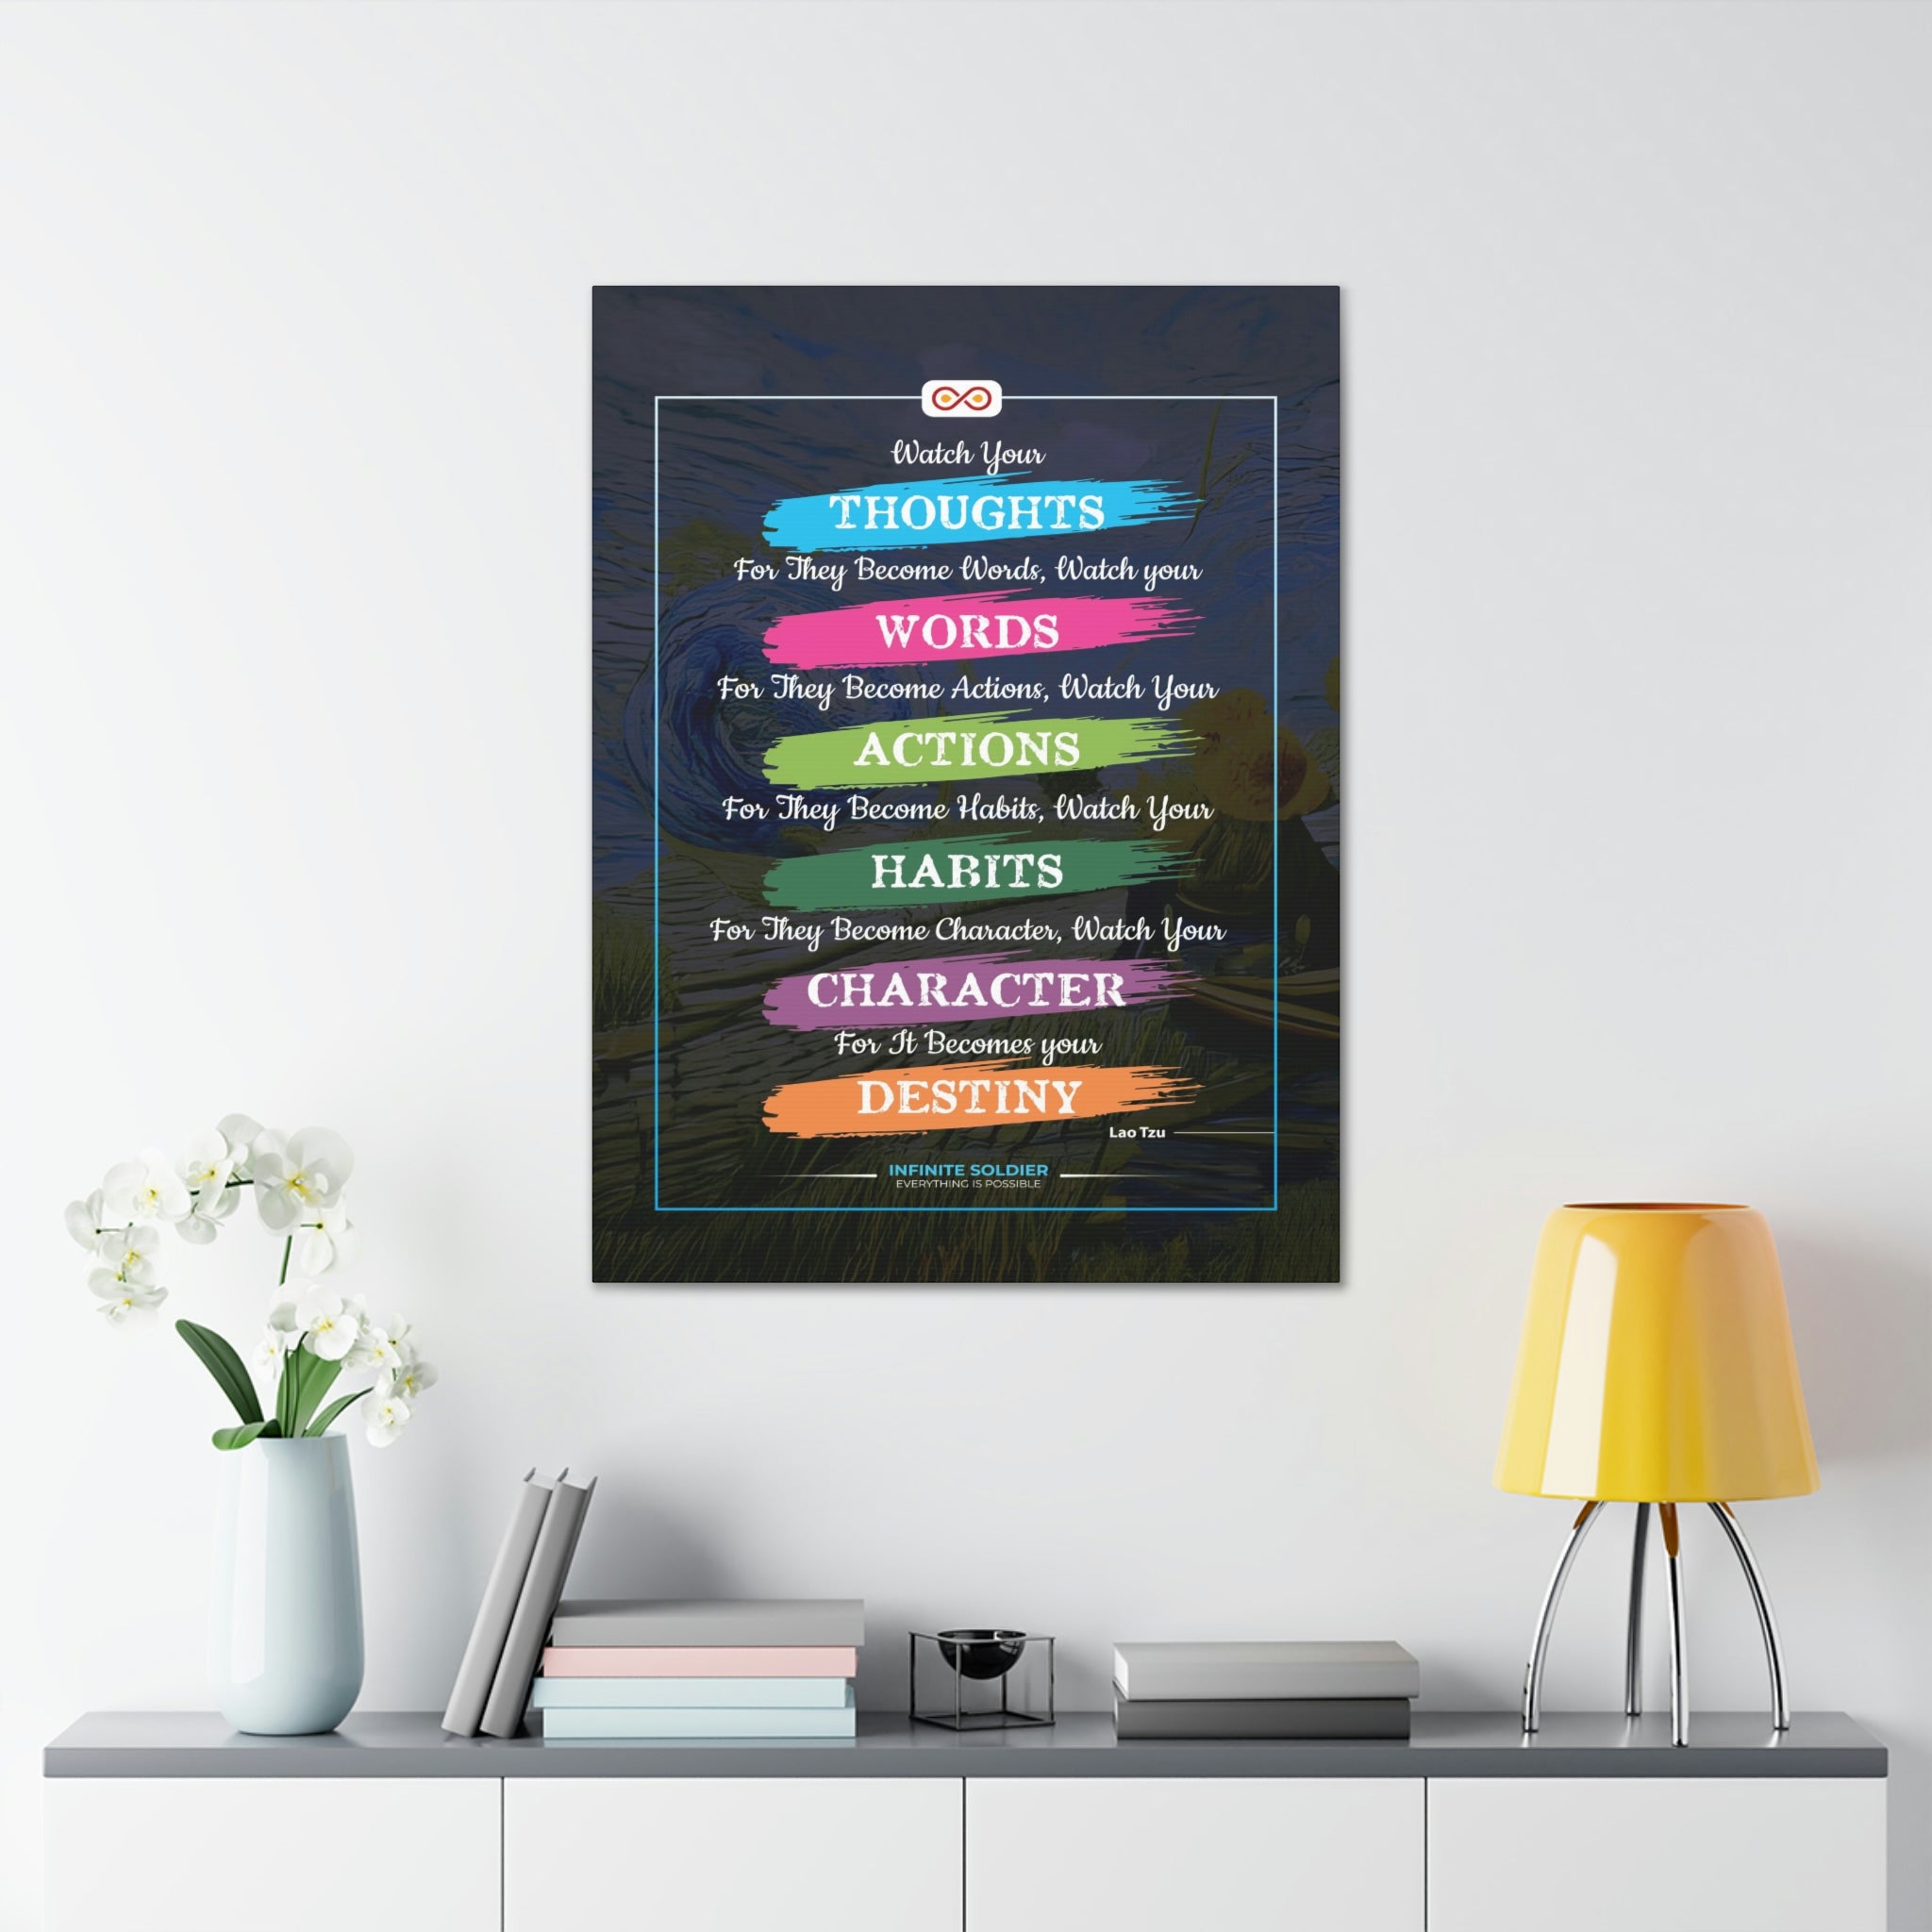 Buddhist Quote Motivational Canvas Poster | Infinite Soldier